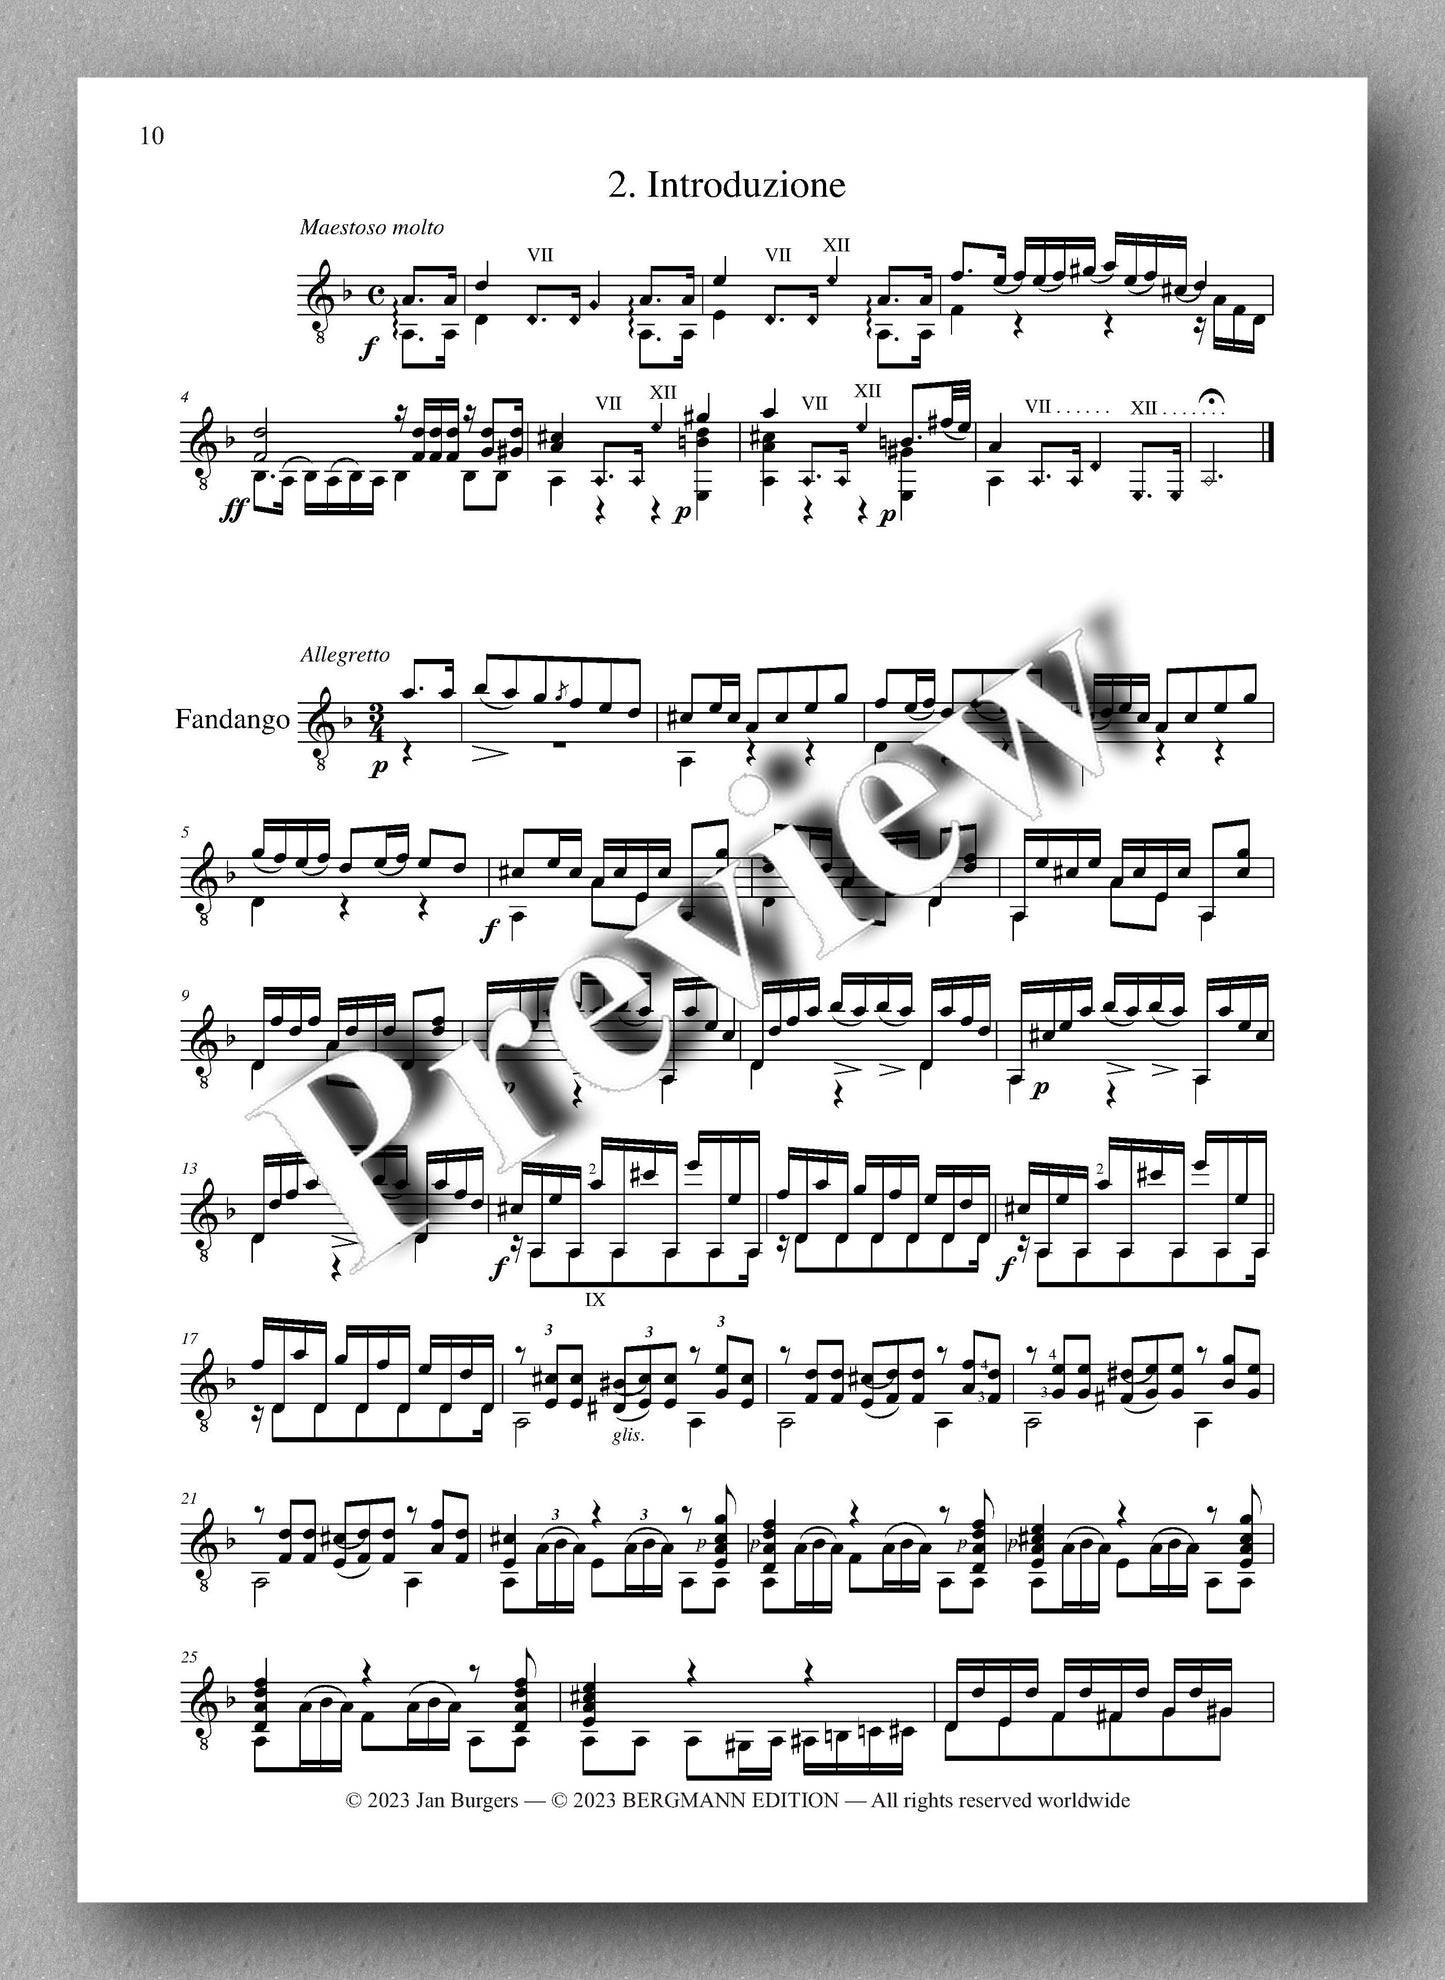 Molino, Collected Works for Guitar Solo, Vol. 42 - preview of the music score 2